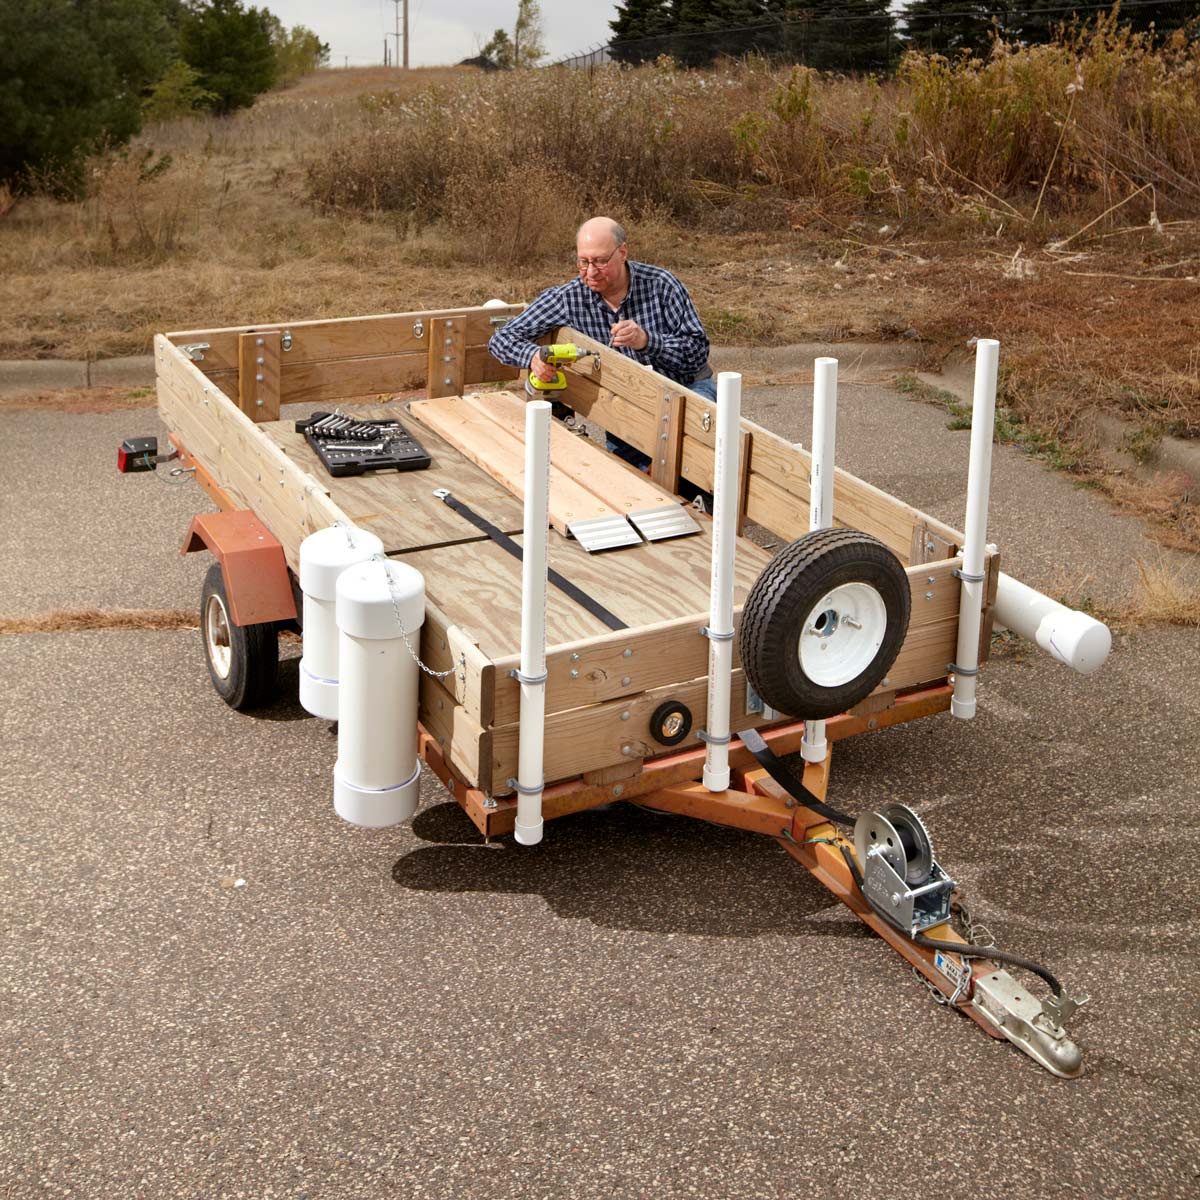 <p>If you plan on putting your <a href="https://www.familyhandyman.com/project/utility-trailer-upgrades/">tiny home on a trailer,</a> pay attention to <a href="https://www.deseretnews.com/article/865684721/7-things-to-consider-before-moving-into-a-tiny-house.html" rel="nofollow">how much weight the trailer is rated to handle</a>. A 10,000-pound weight rating for a trailer includes the weight of the trailer. So the weight of the home, the possessions inside the home and the trailer have to be monitored closely. You’ll also have to pay attention to how much your vehicle can pull behind it.</p>